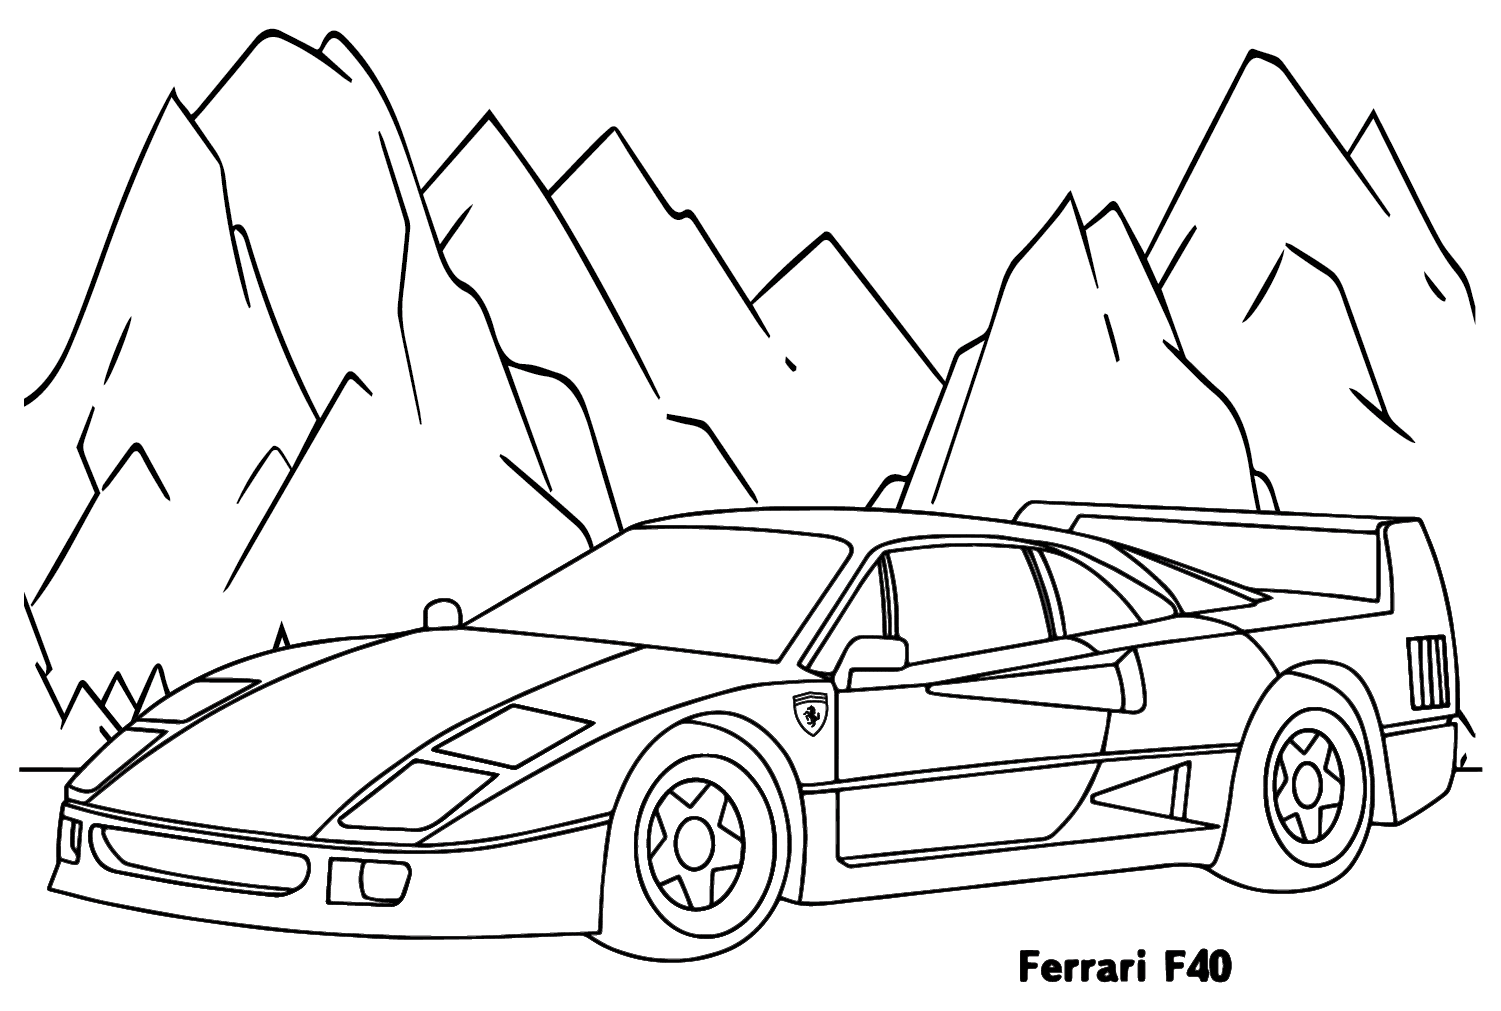 Ferrari F40 Coloring Page - Free Printable Coloring Pages